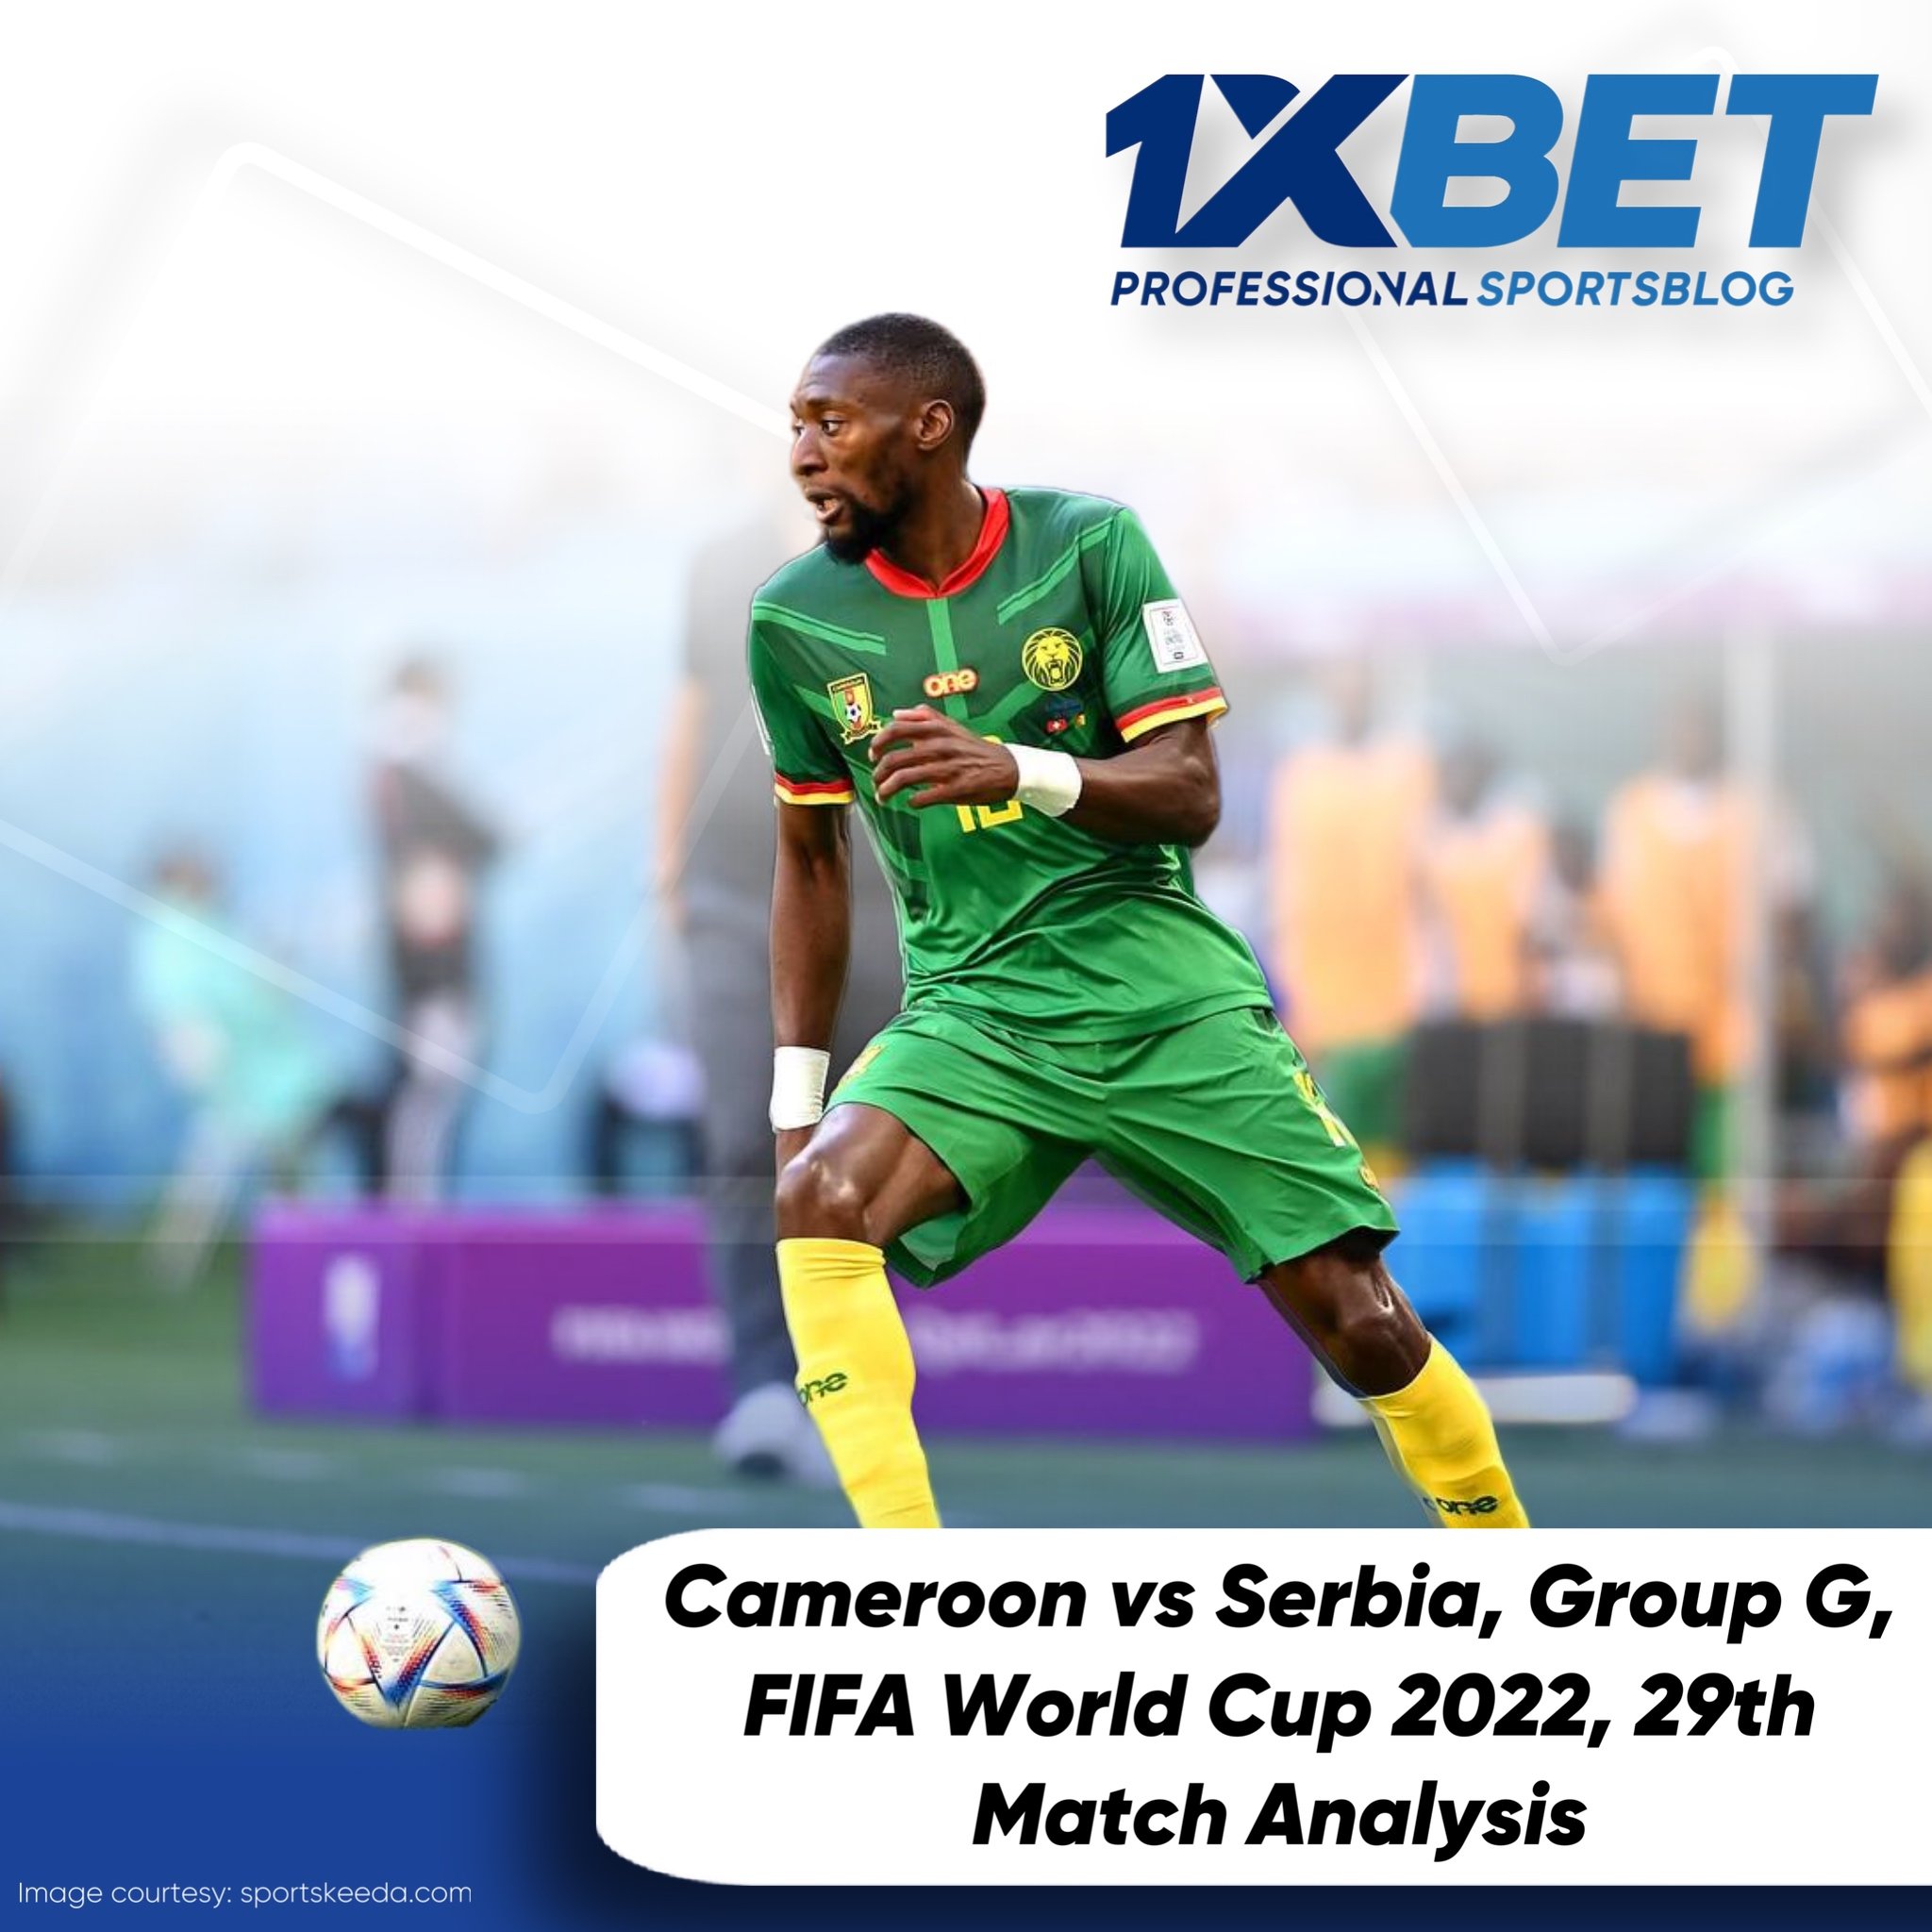 Cameroon vs Serbia, Group G, FIFA World Cup 2022, 29th Match Analysis